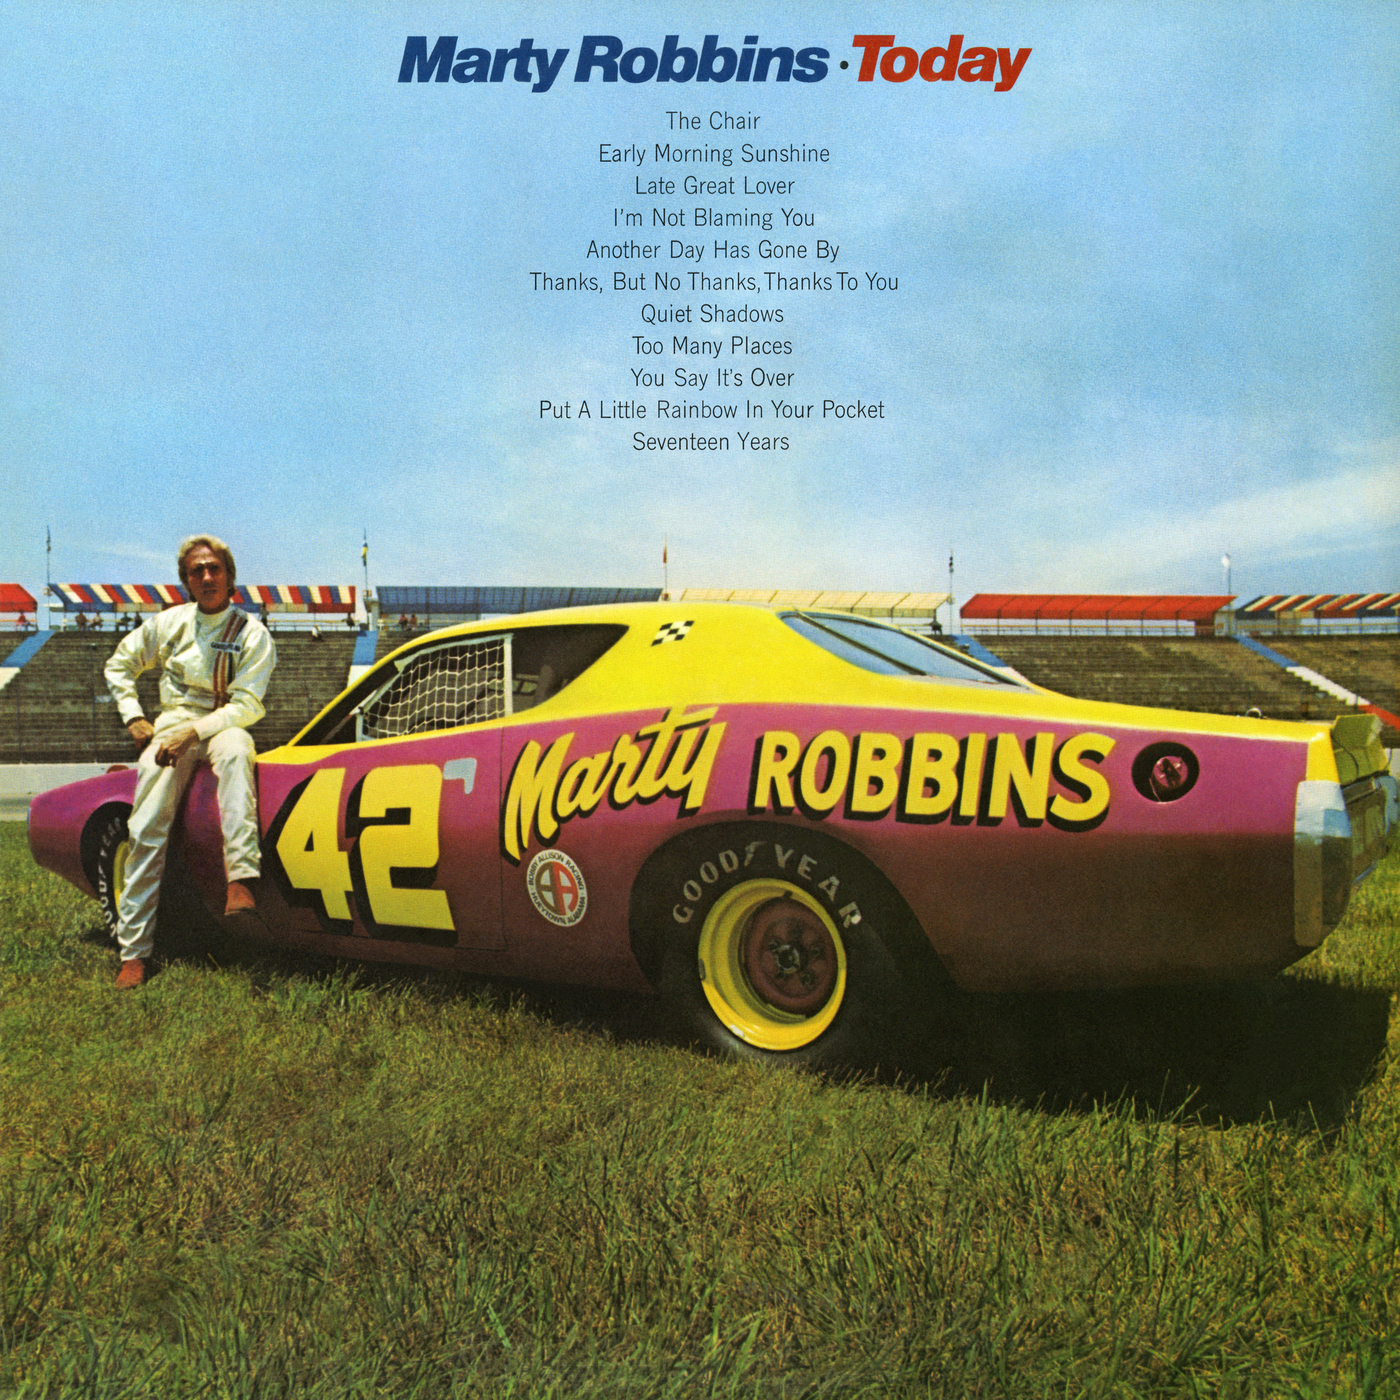 The Chair/Marty Robbins